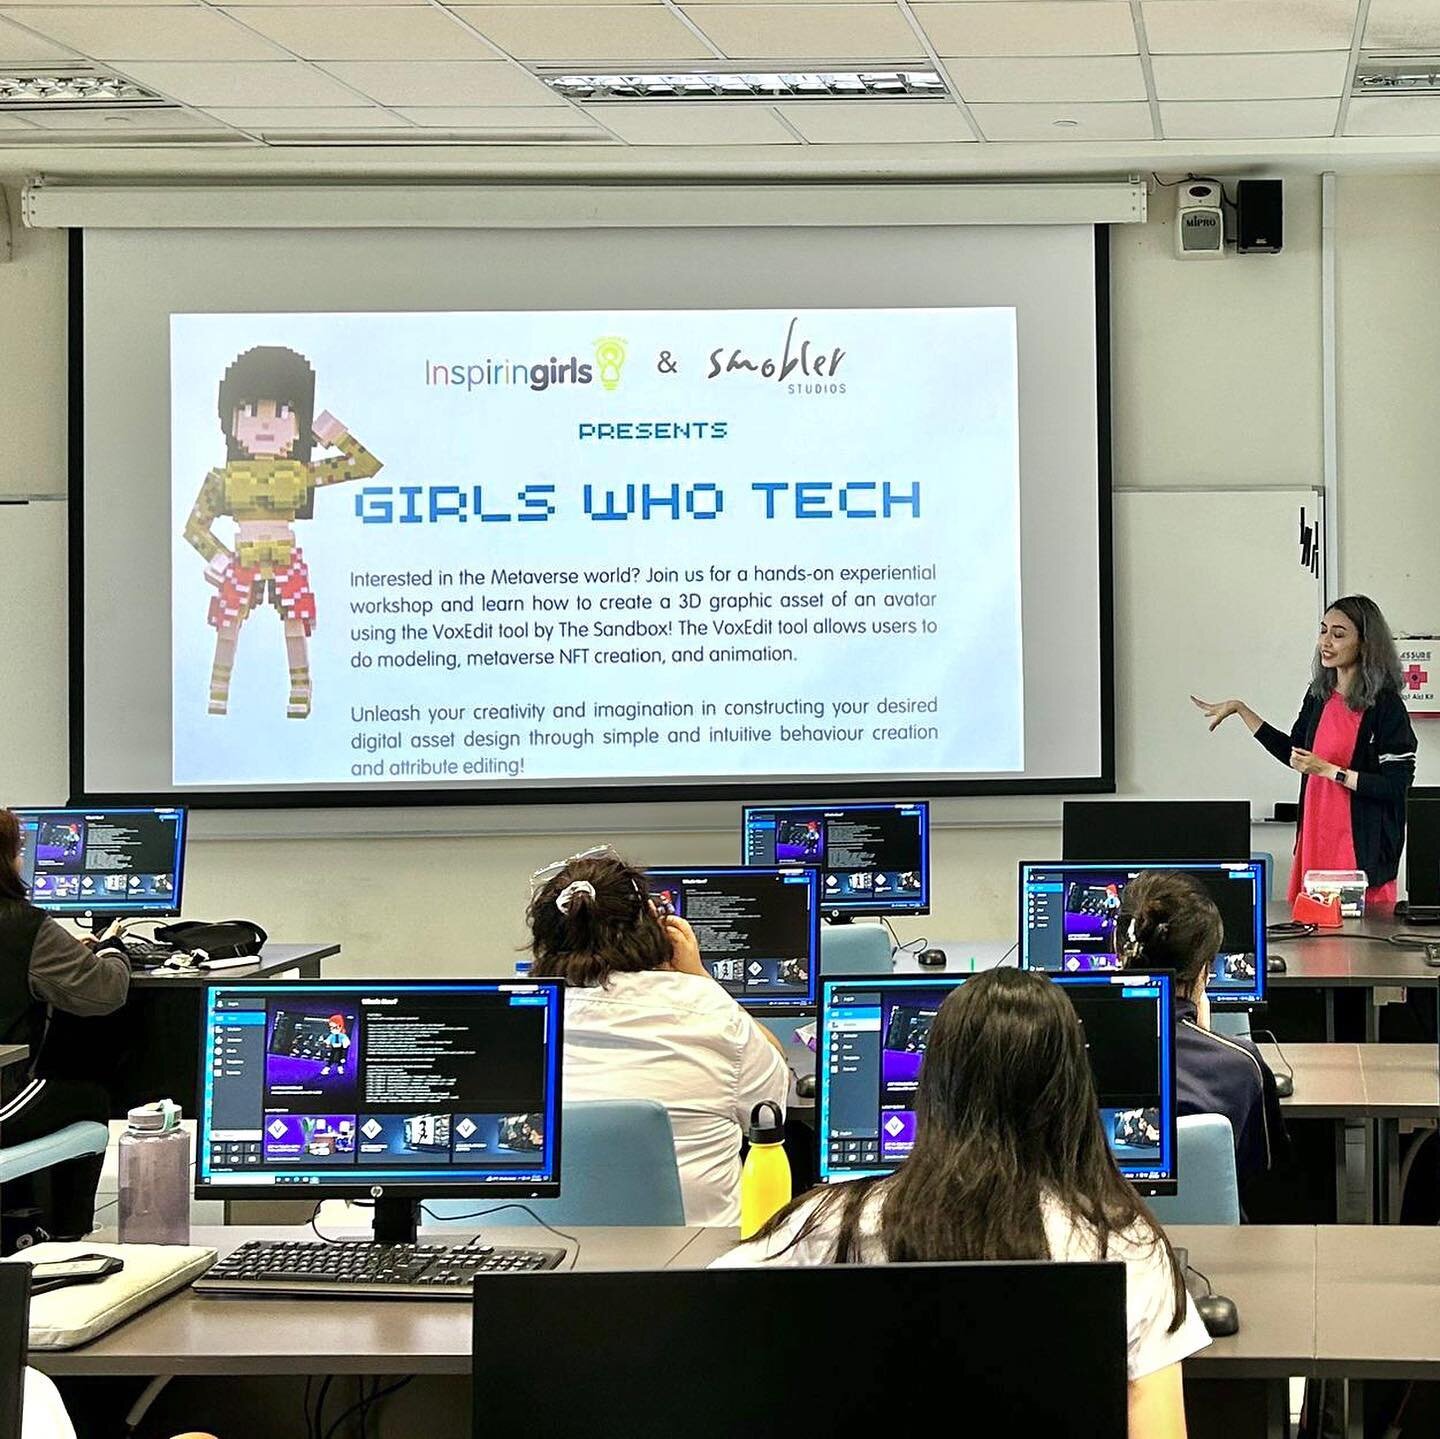 On International Day of Happiness, Inspiring Girls Singapore and Smobler Studios rolled out a Voxel Art Workshop to a group of ITE girls - this is the first ever voxel workshop to be conducted in schools in Singapore! 😮

Through this experiential wo